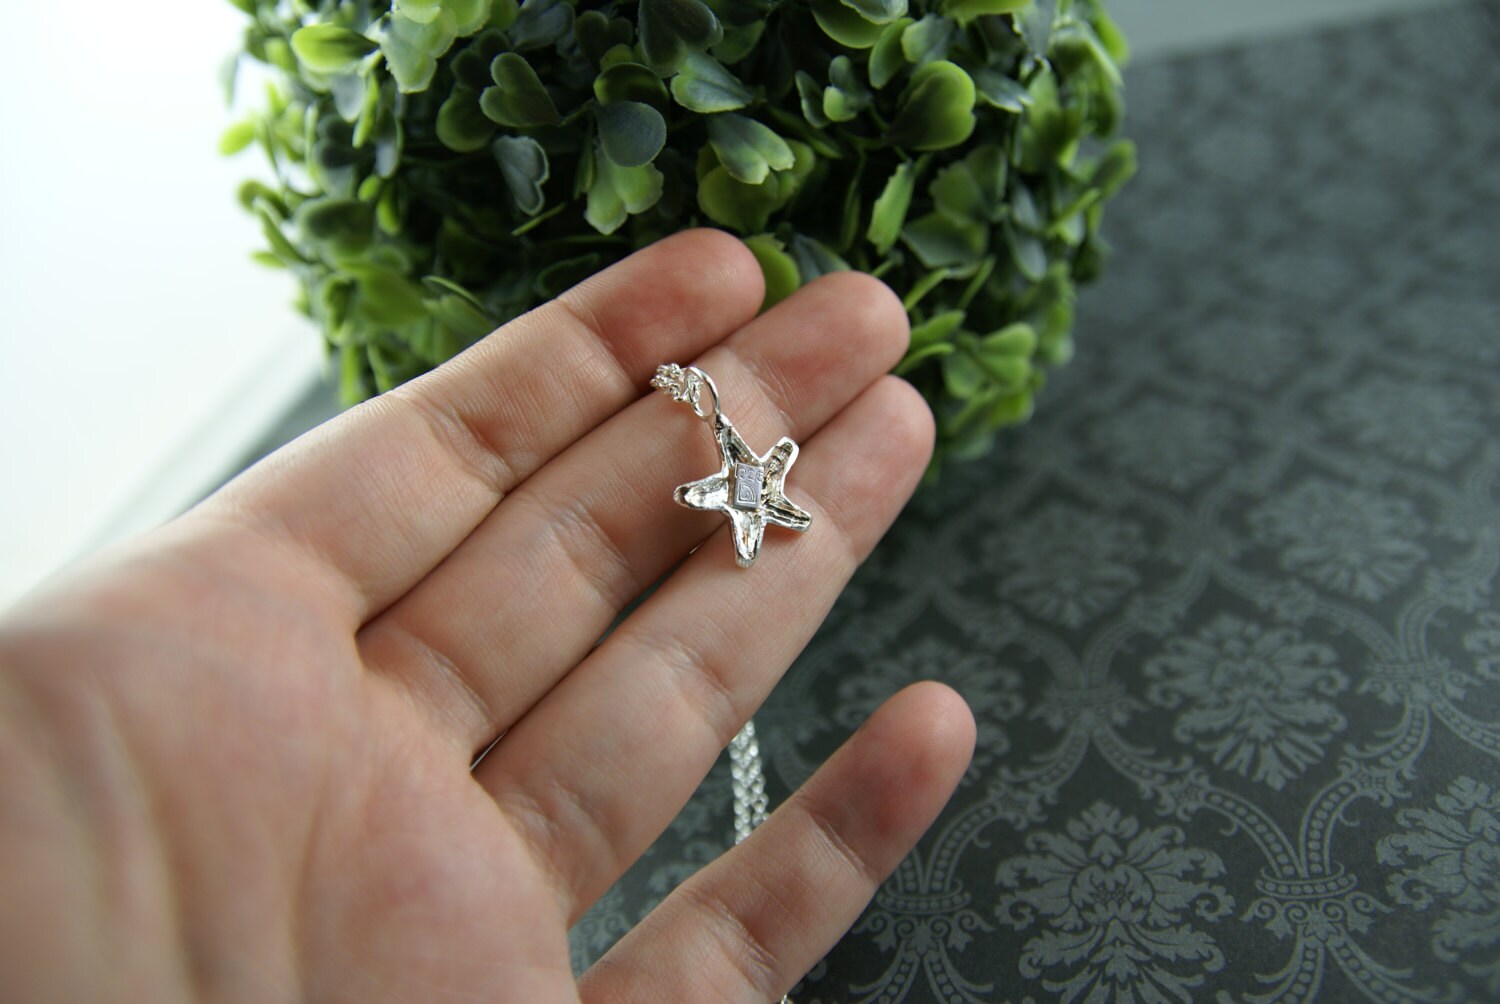 Small Starfish Pendant in Sterling Silver